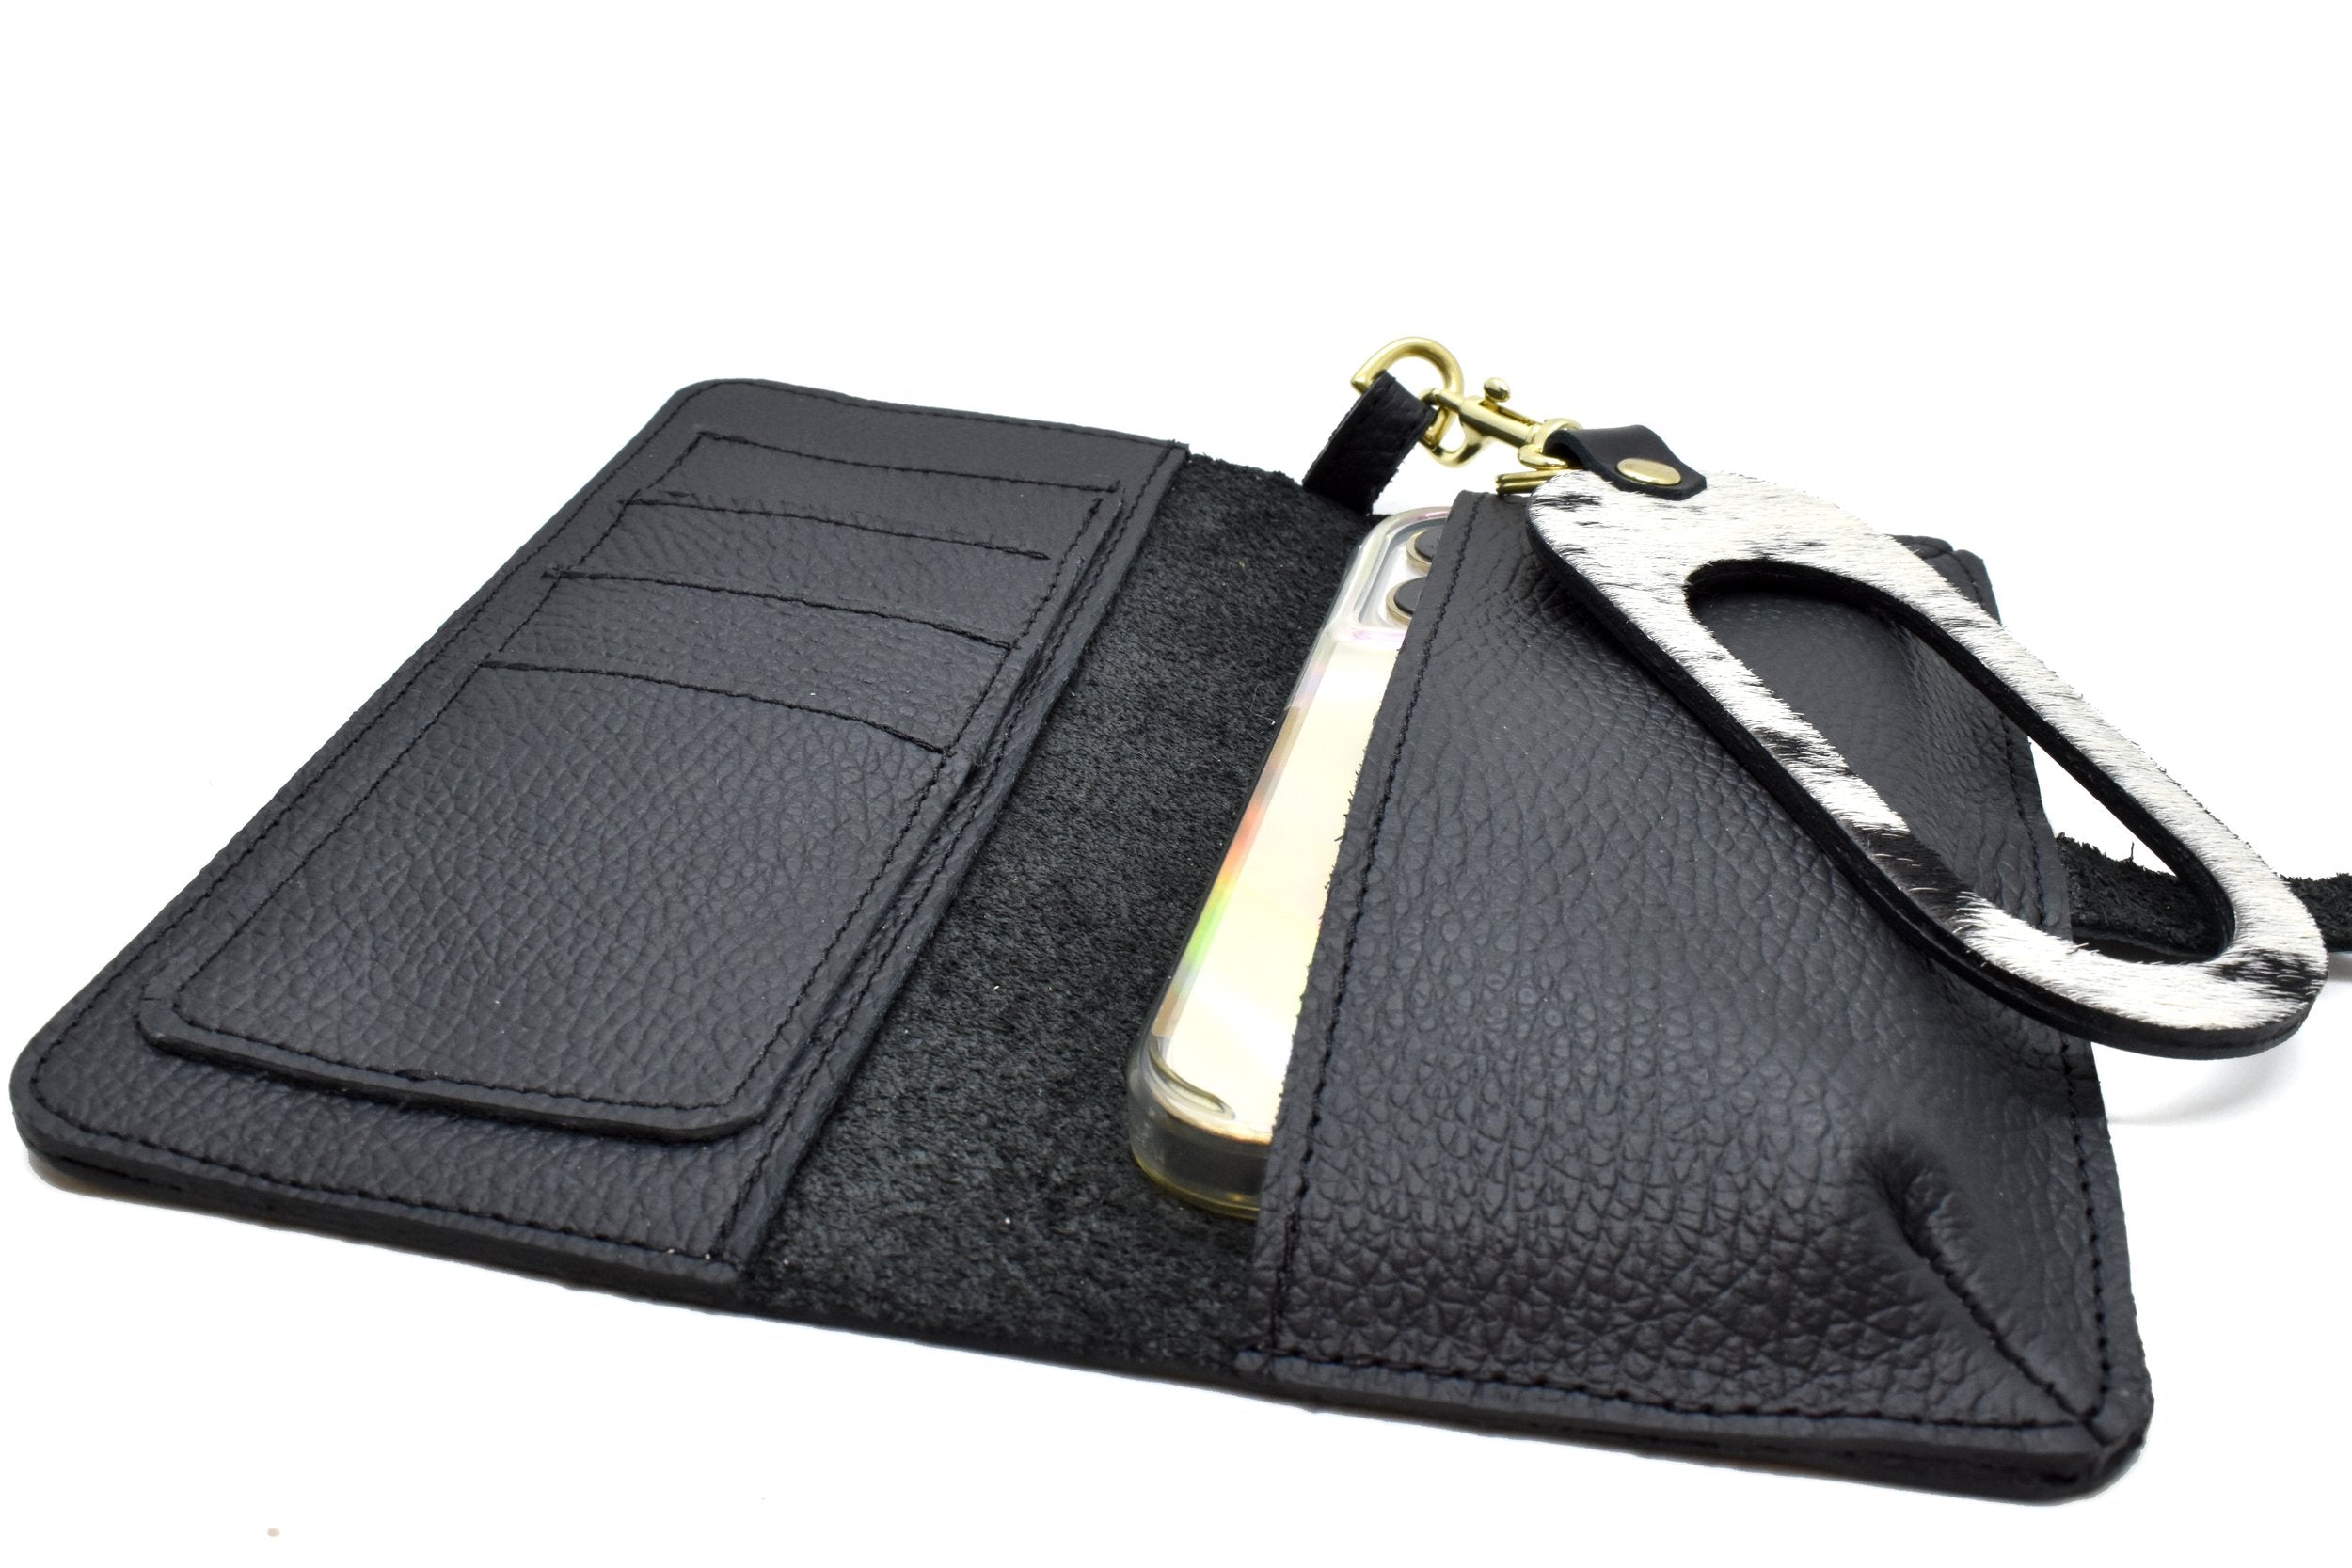 inside of black leather catch all wallet with phone tucked in pocket